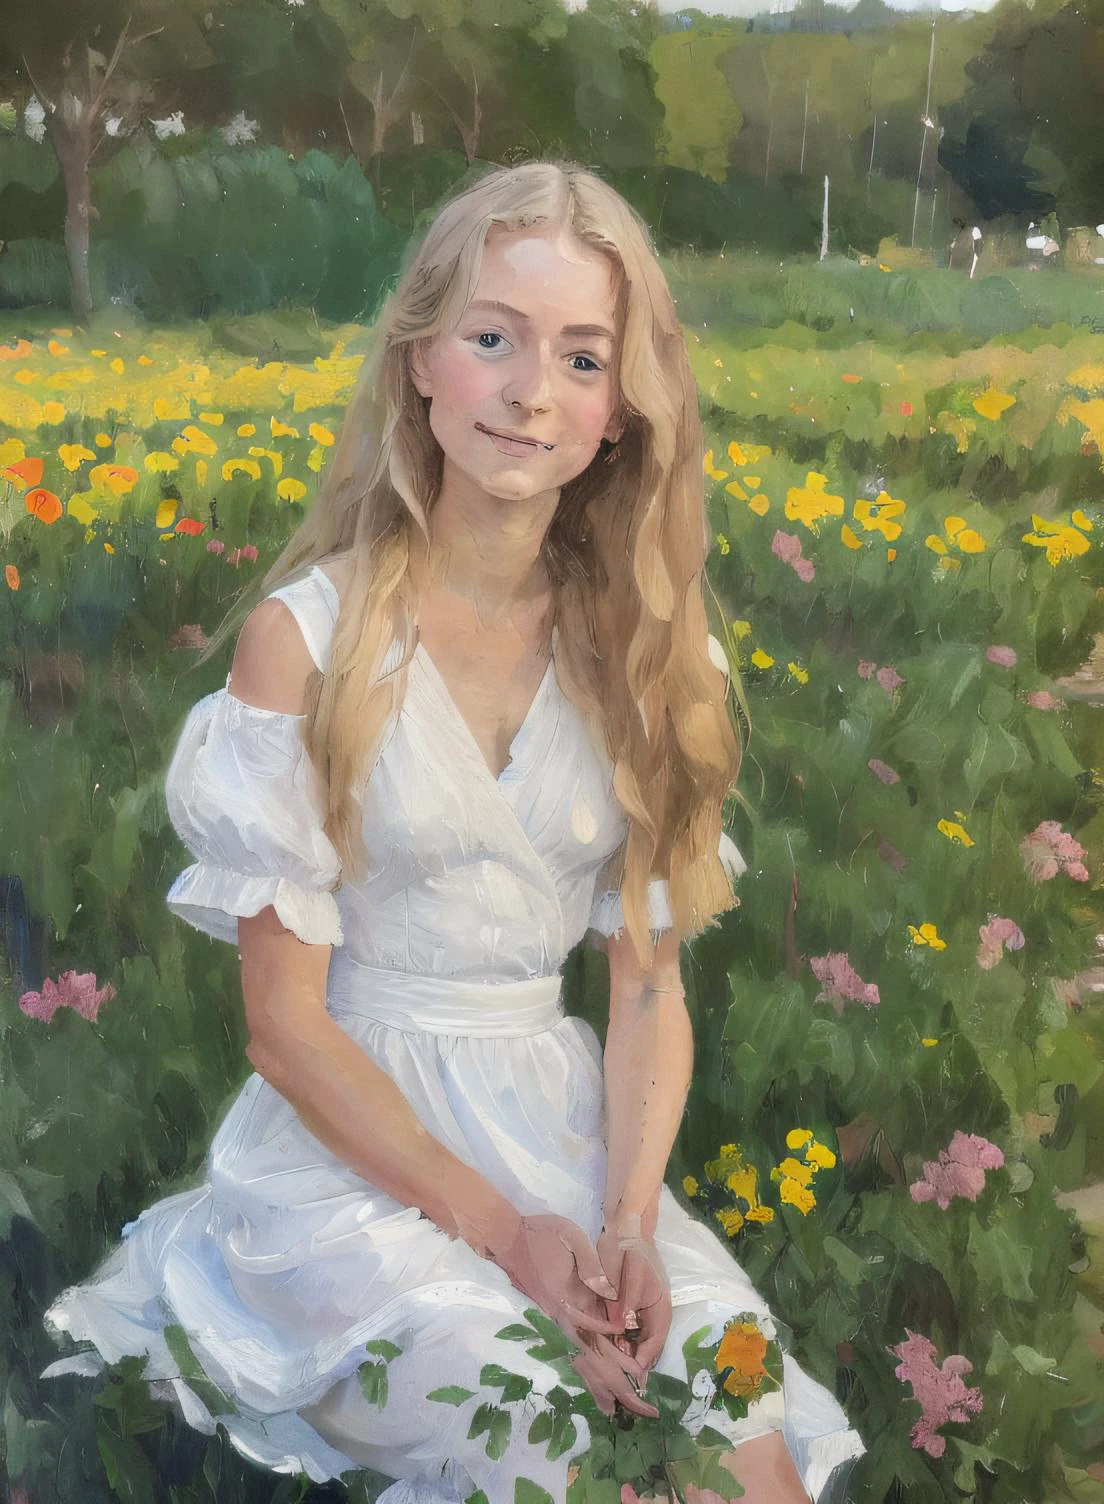 (a painting by mse) (brush strokes) (masterpiece, best quality), close up to face 1girl 18 years old with long blond hair sitting in a field of green plants and flowers, her hand under her chin, warm lighting, white dress, detaled facial features, delicate